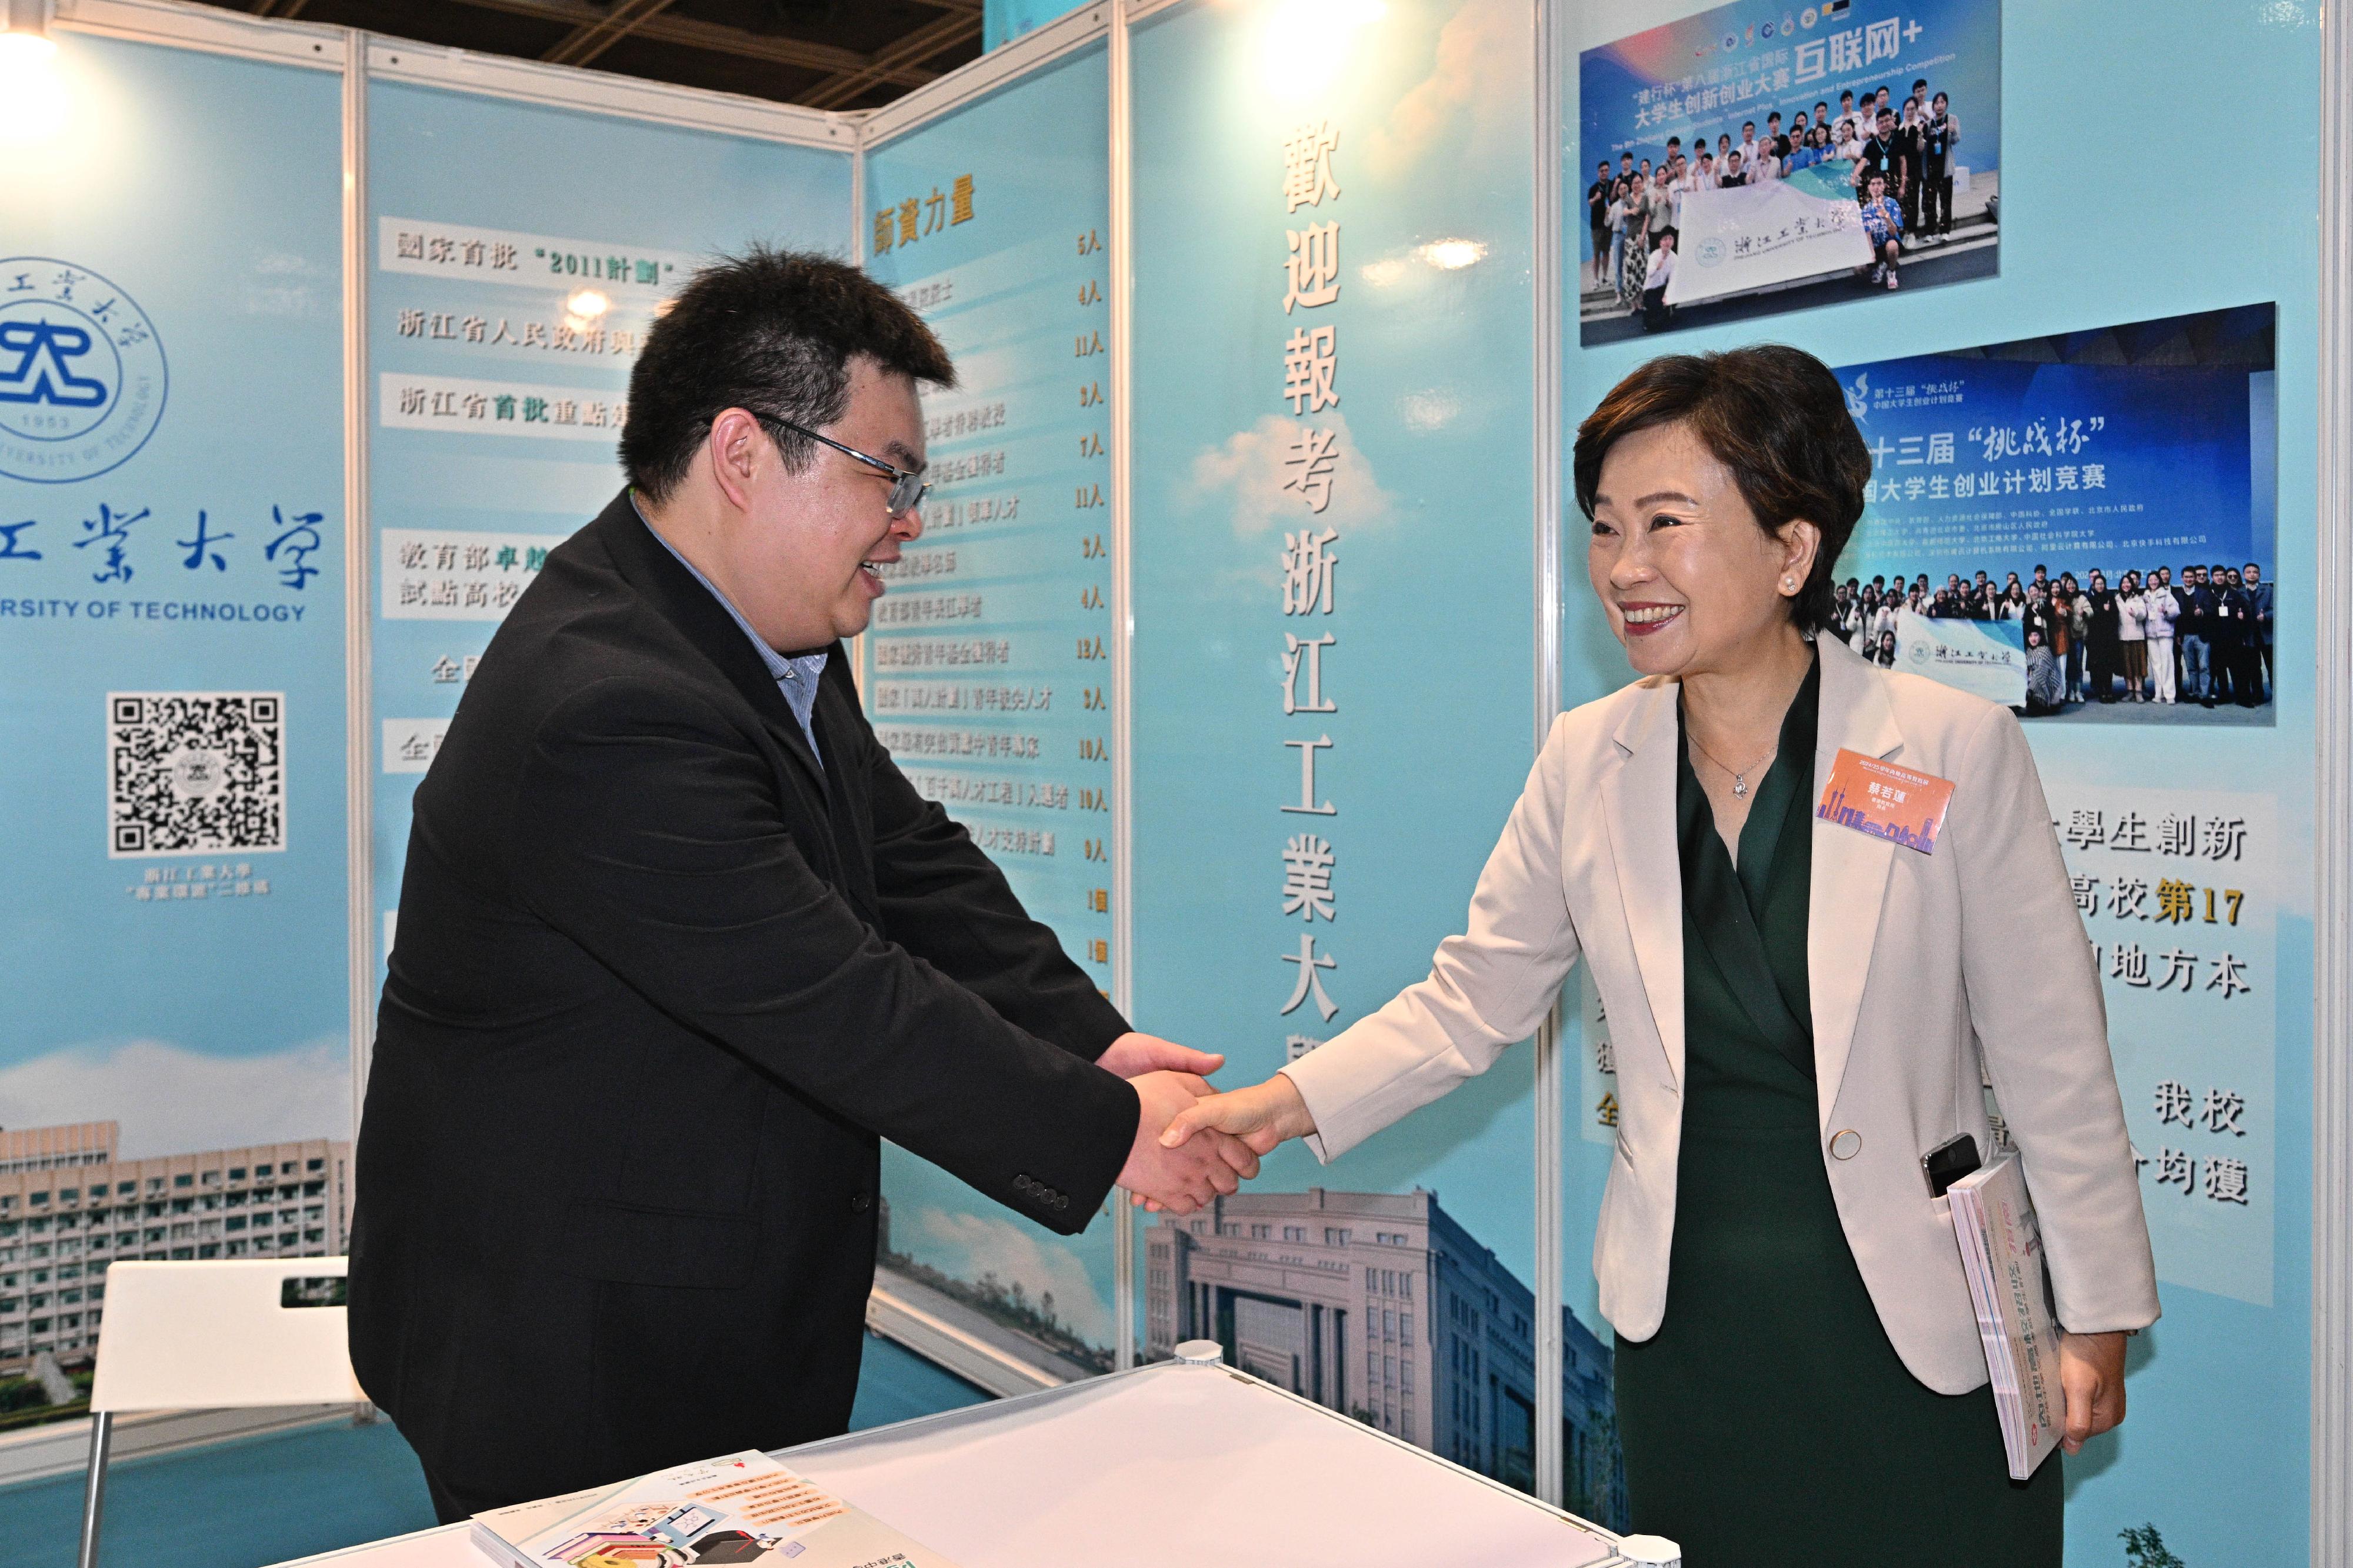 The Mainland Higher Education Expo 2024/25, jointly organised by the Ministry of Education and the Education Bureau, is being held today and tomorrow (December 2 and 3) at the Hong Kong Convention and Exhibition Centre in Wan Chai. Photo shows the Secretary for Education, Dr Choi Yuk-lin (right) visiting an exhibition booth.